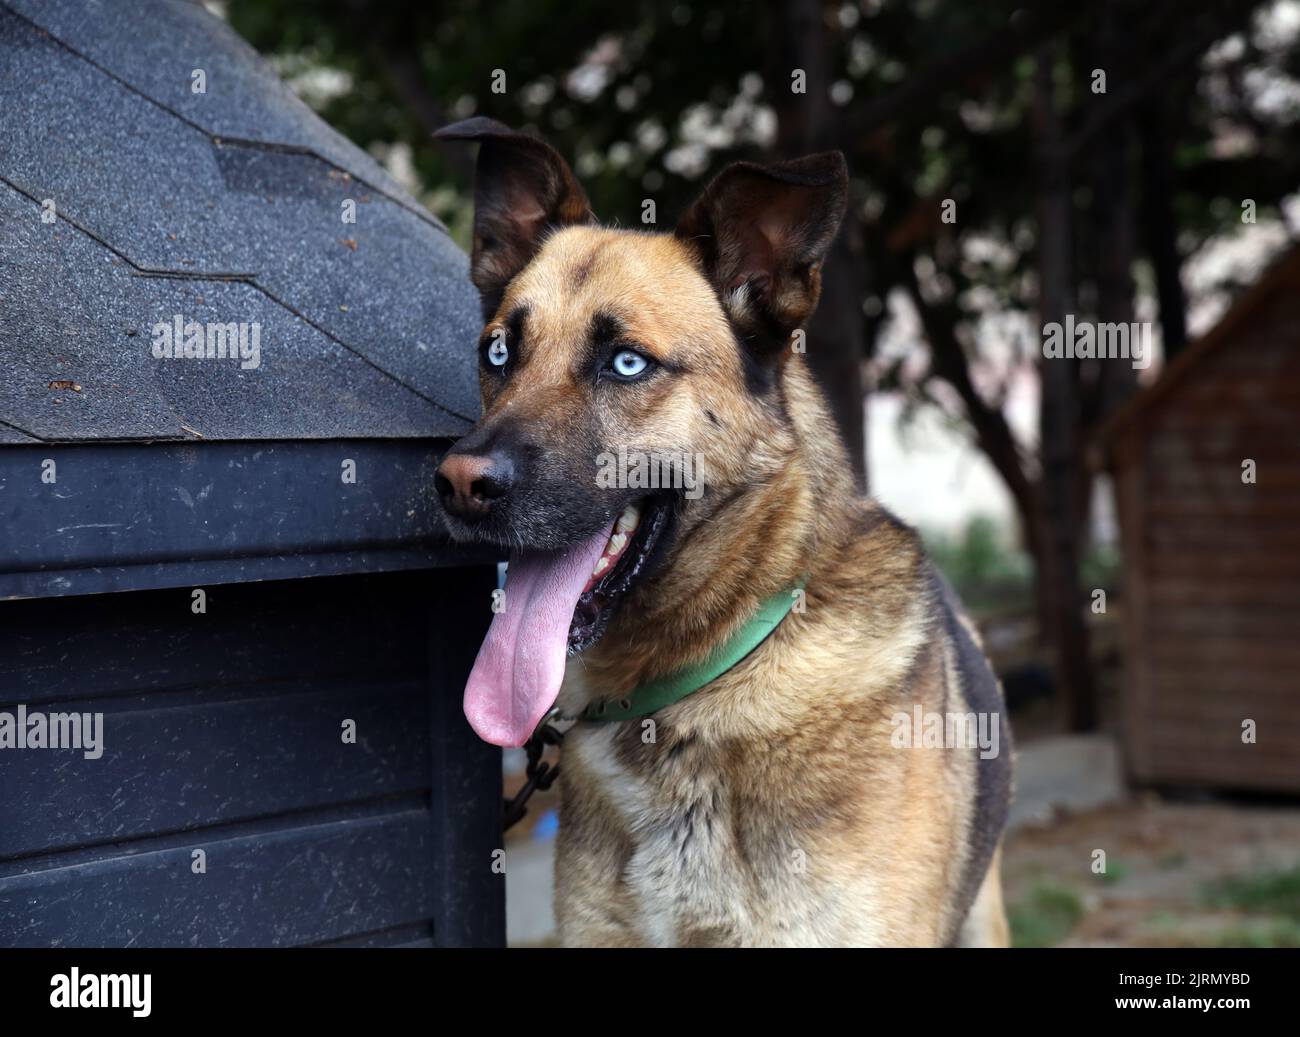 Front portrait of a large dog with blue eyes outdoors in front of its kennel, looking away Stock Photo